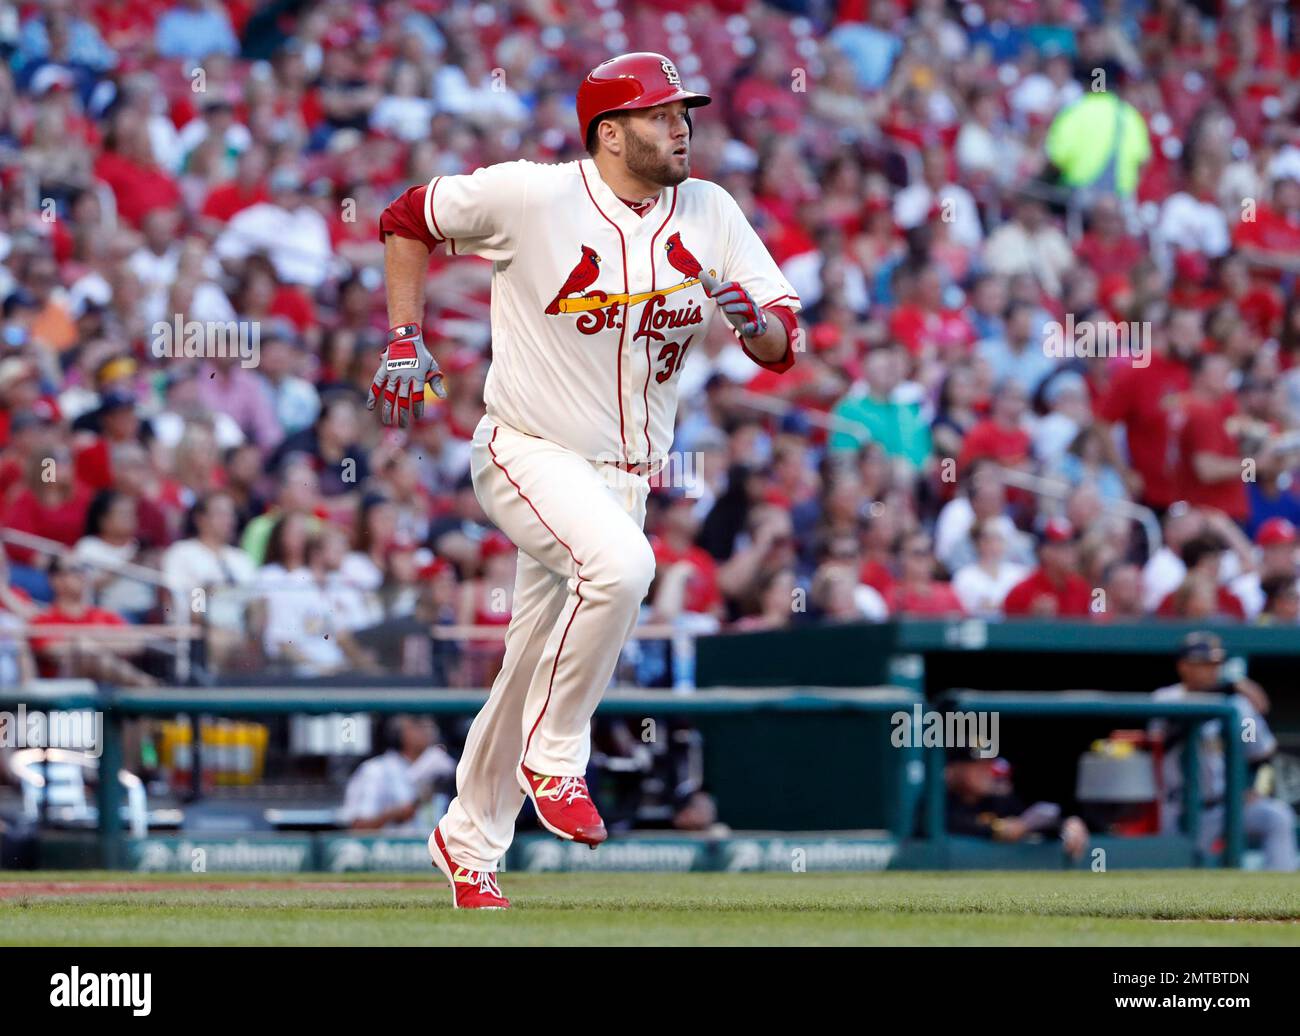 NLCS 2013: Lance Lynn to start Game 4 for Cardinals 